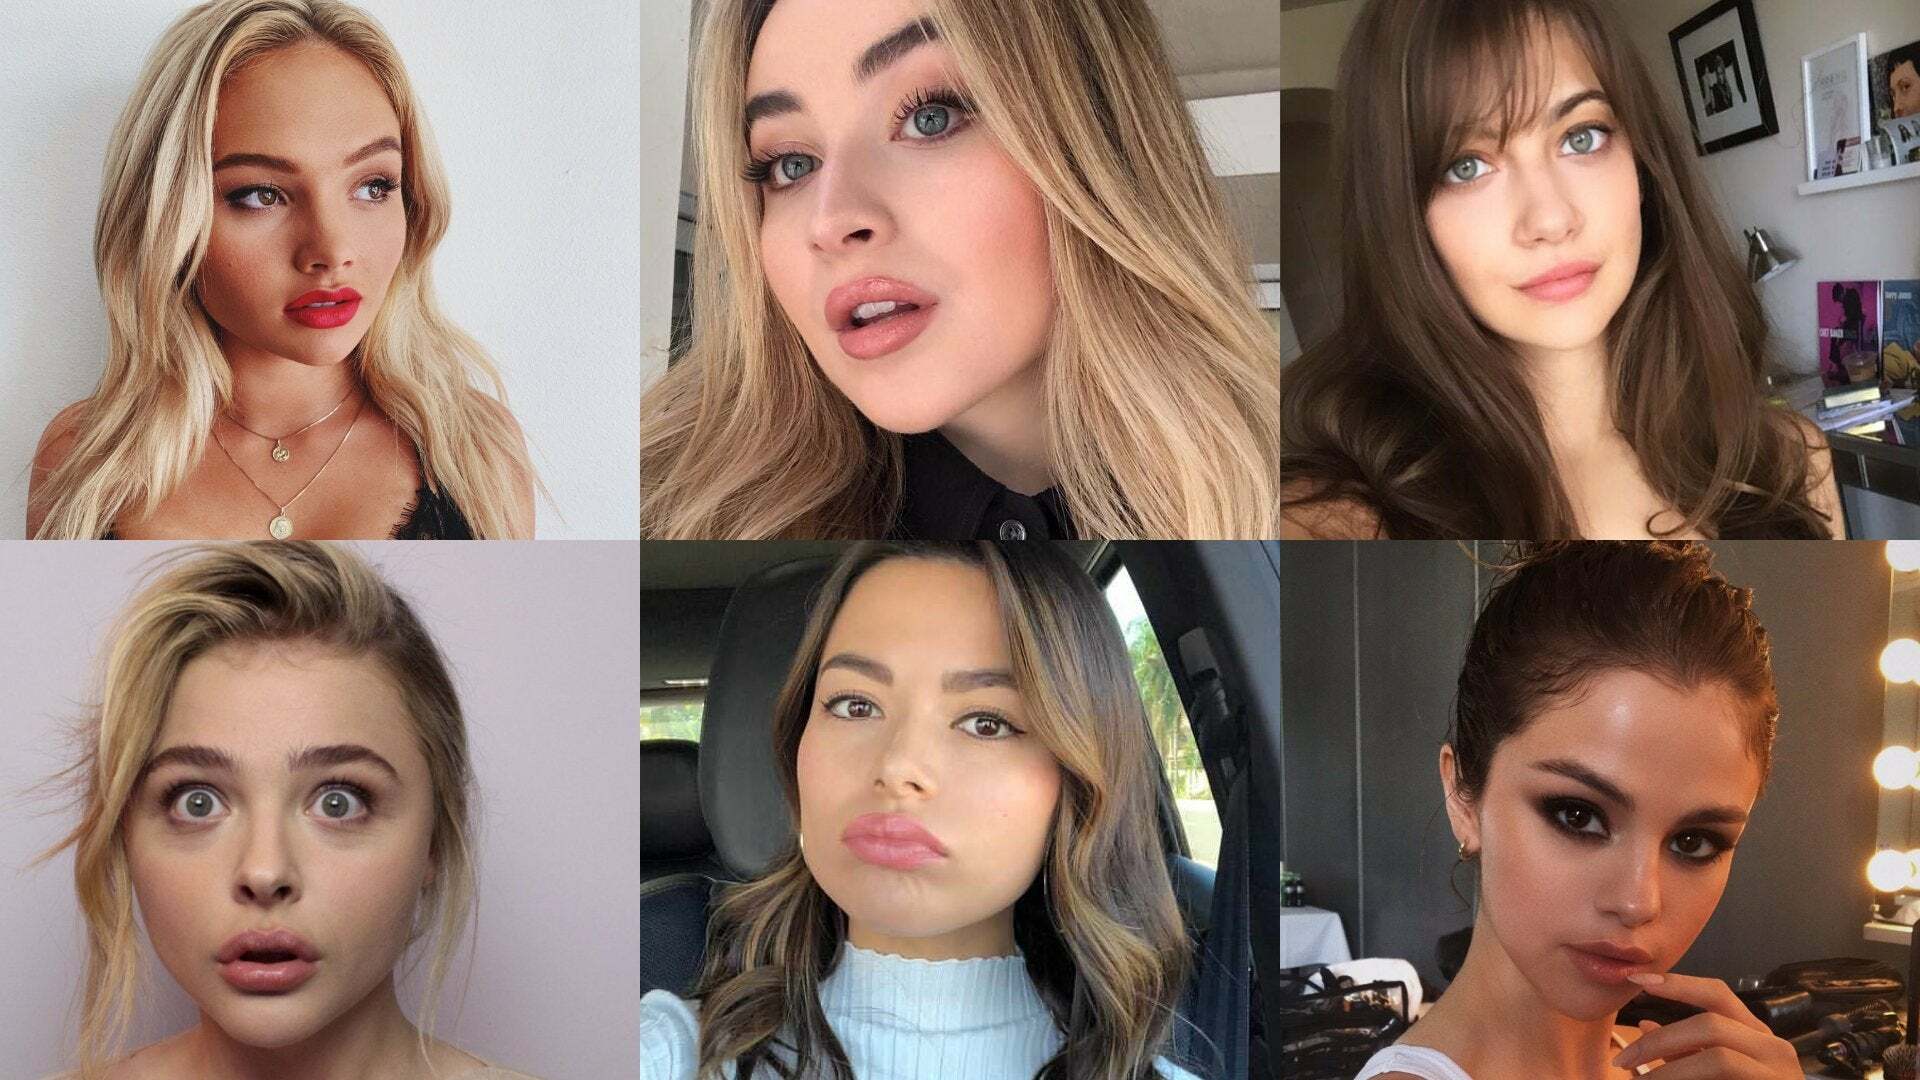 Nataly Alyn Lind, Sabrina Carpenter, Mia Serafino, Chloe Grace Moretz, Miranda Cosgrove, Selena Gomez - take one for pussy, one for ass, one for titfuck, one for 69 and two for double blowjob and why